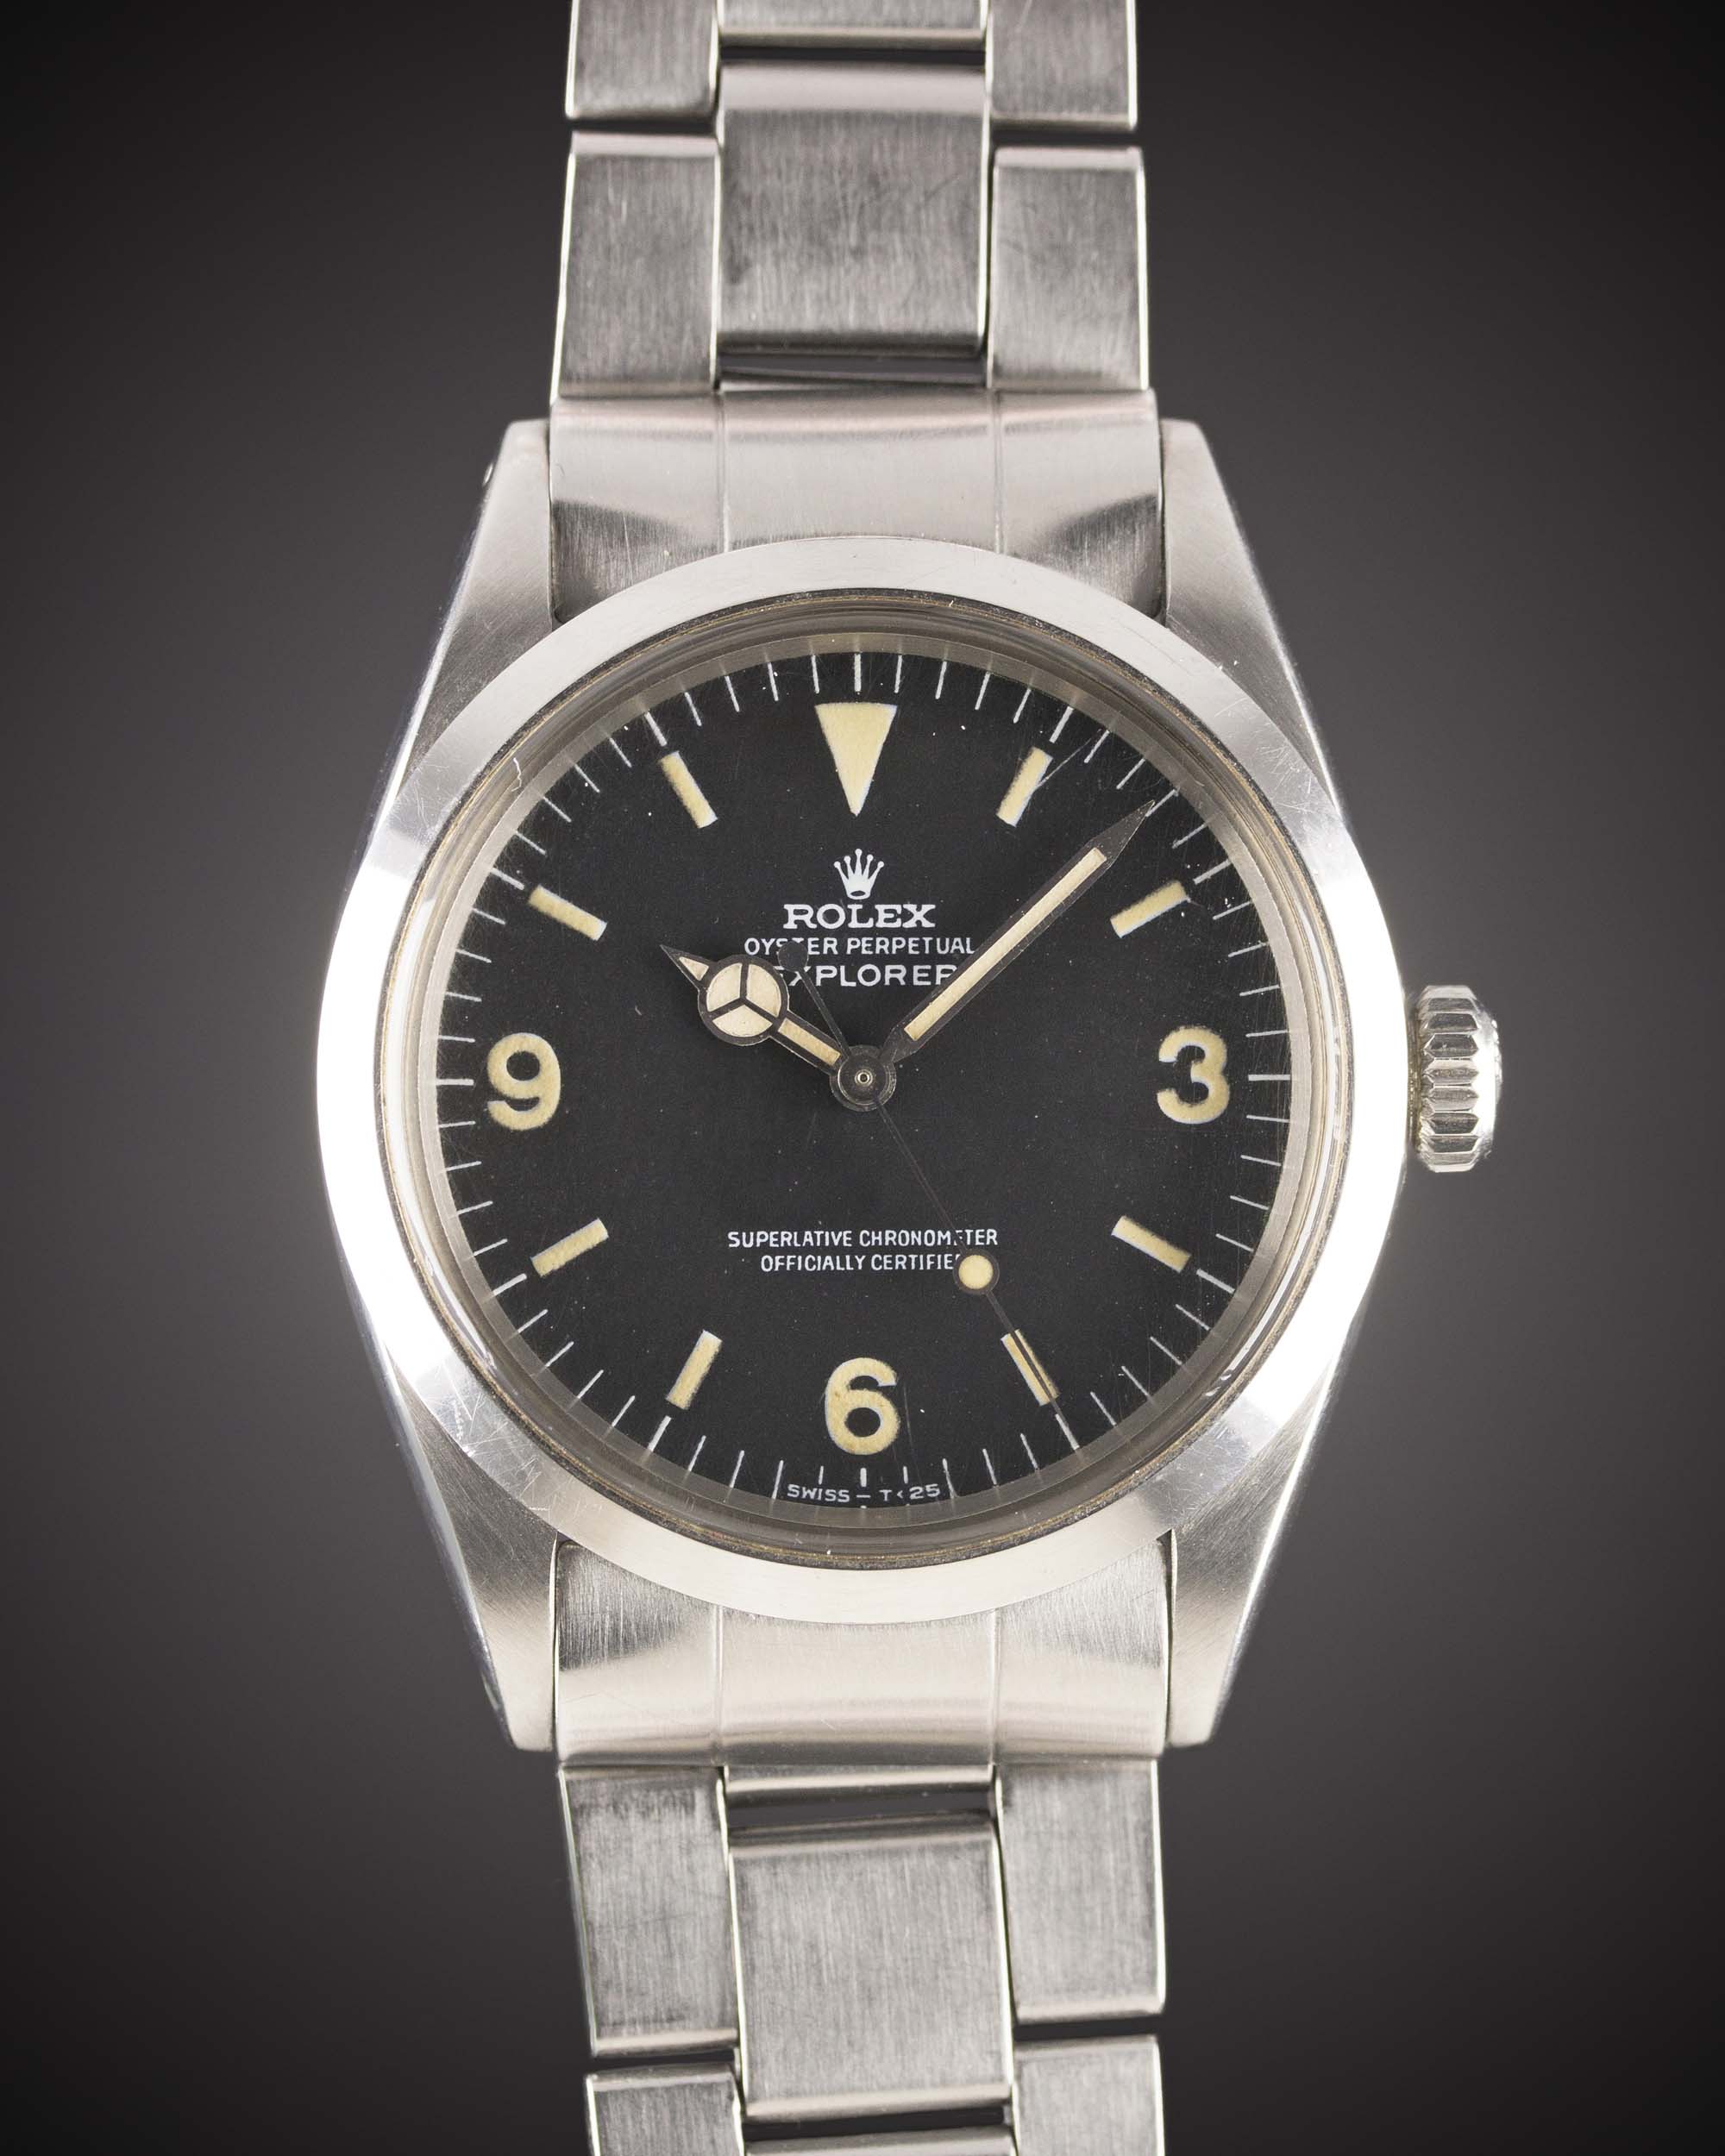 A RARE GENTLEMAN'S STAINLESS STEEL ROLEX OYSTER PERPETUAL EXPLORER BRACELET WATCH CIRCA 1972, REF. - Image 3 of 13